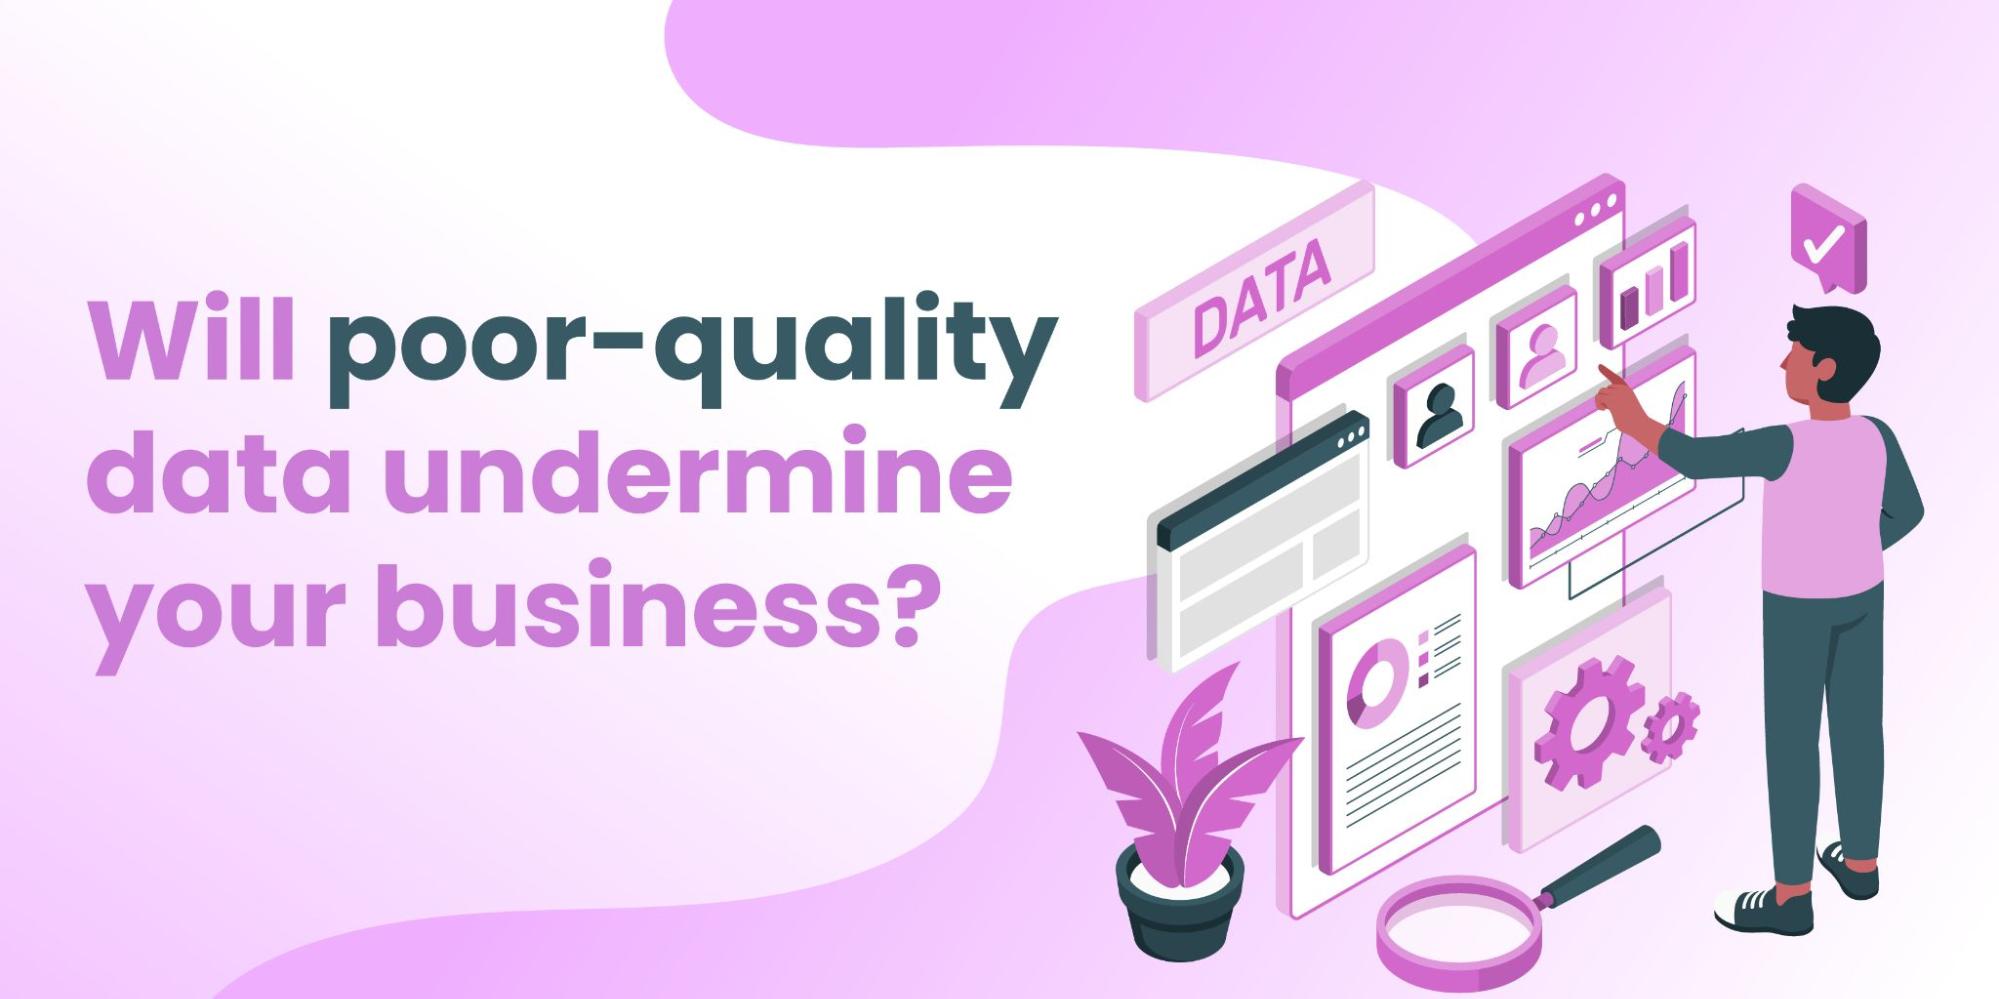 Will poor-quality data undermine your business?